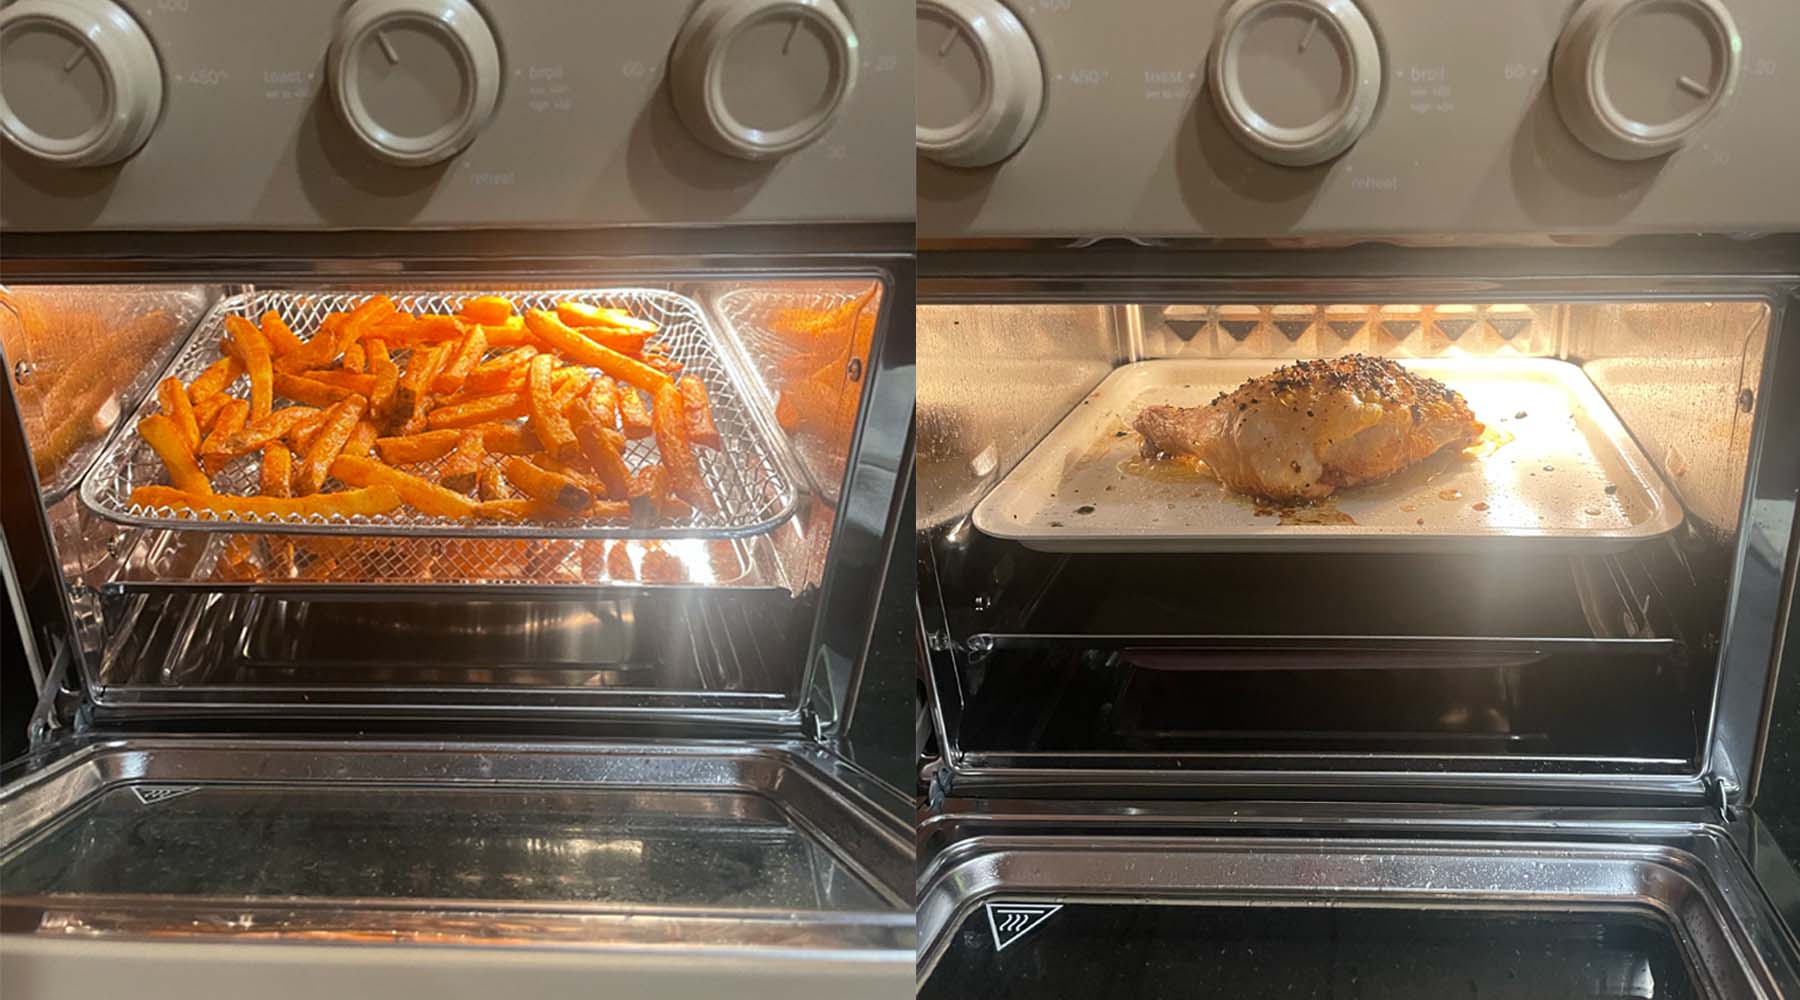 An Honest Review: Our Place's Wonder Oven (Almost) Does It All